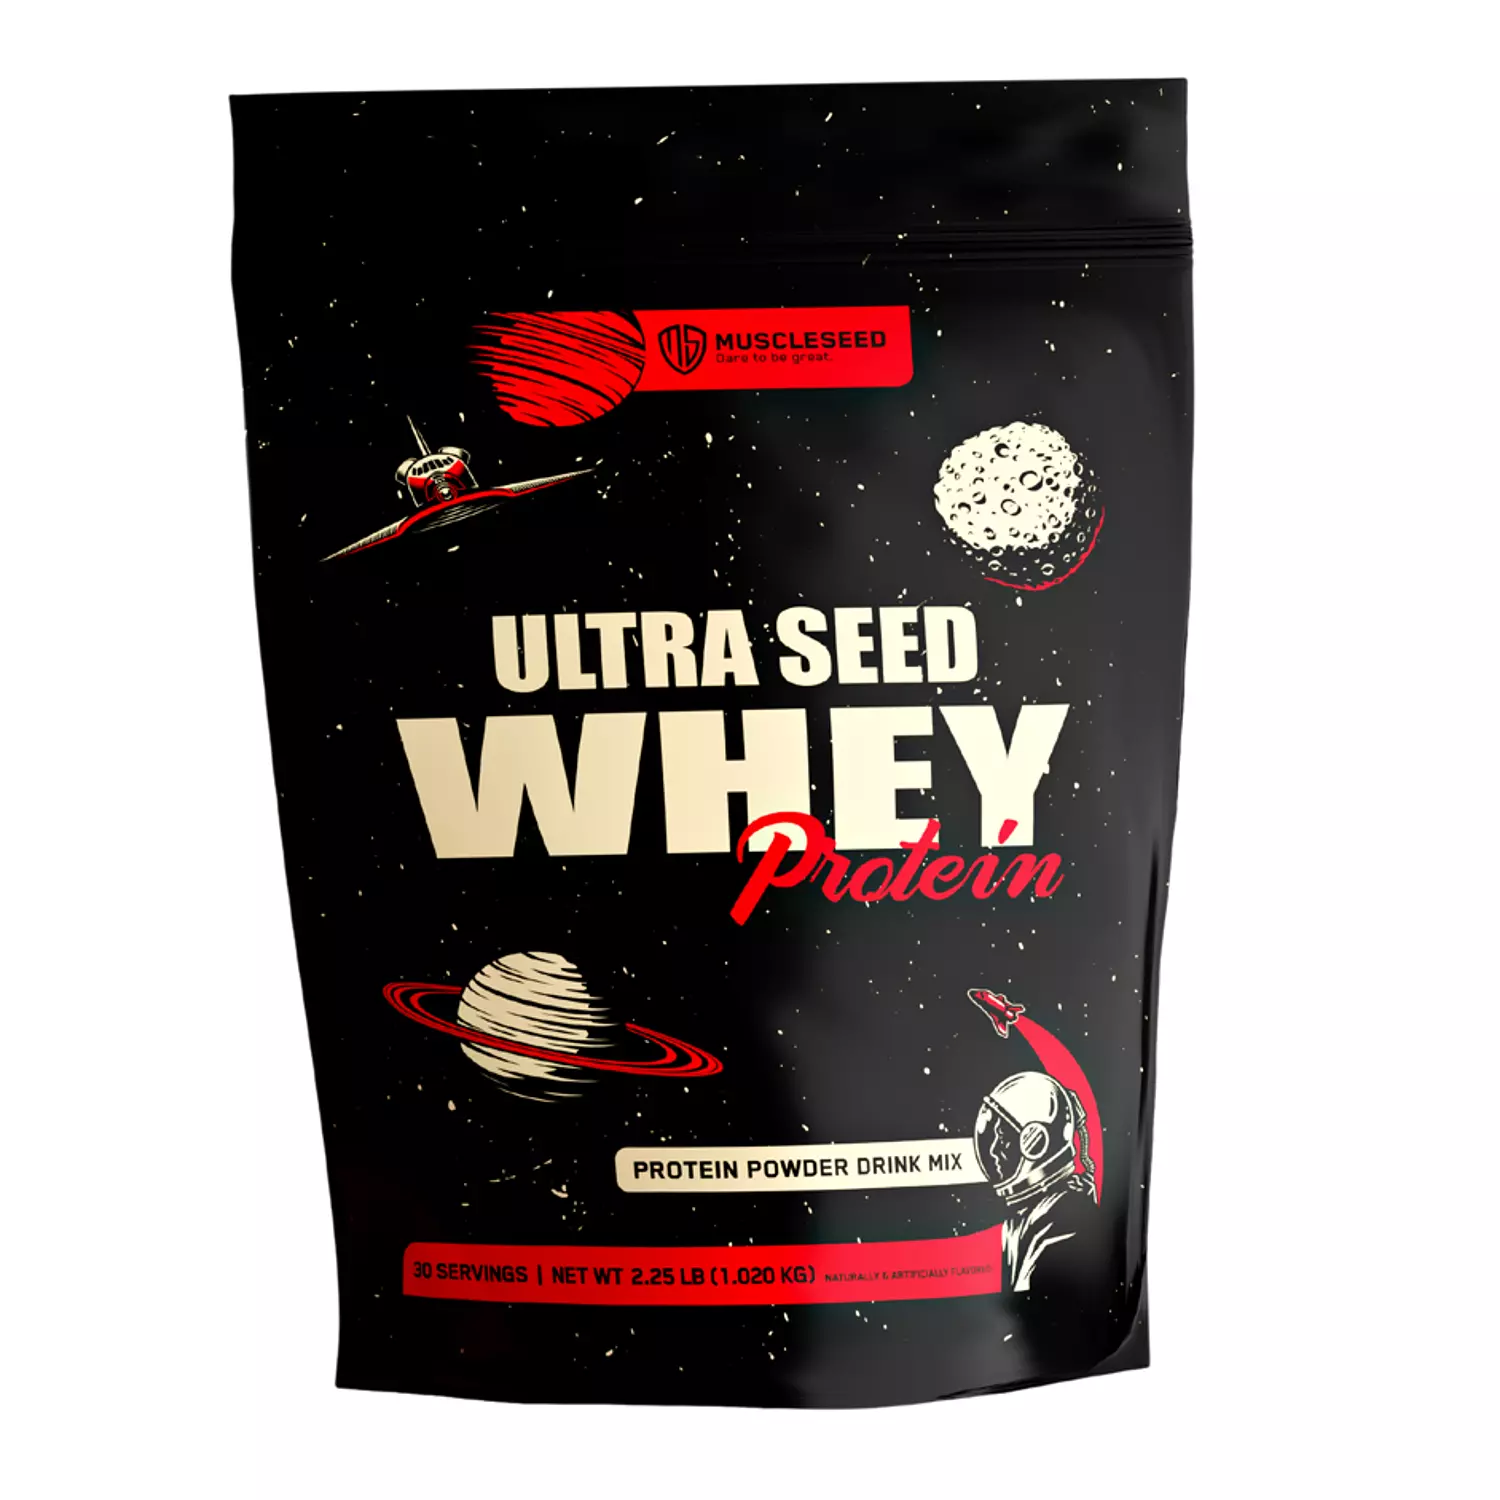 Ultra Seed Whey Protien  hover image